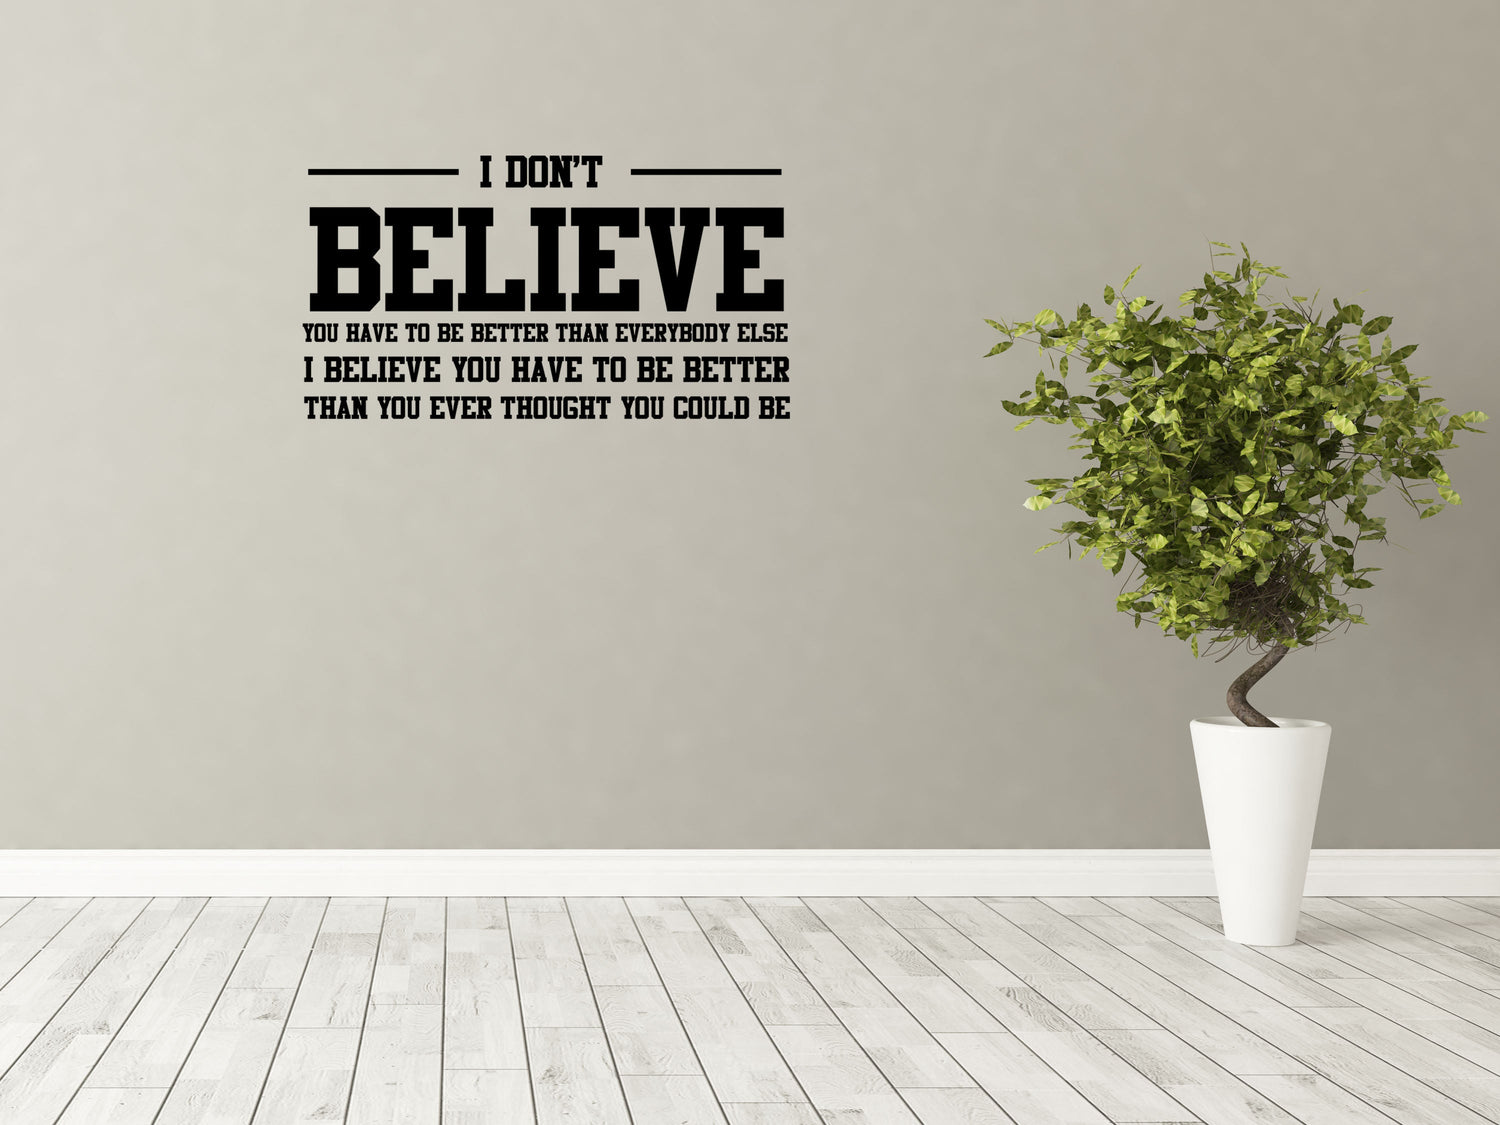 I Believe Family Room Wall Sticker Quote - Inspirational Wall Signs Vinyl Wall Decal Inspirational Wall Signs 